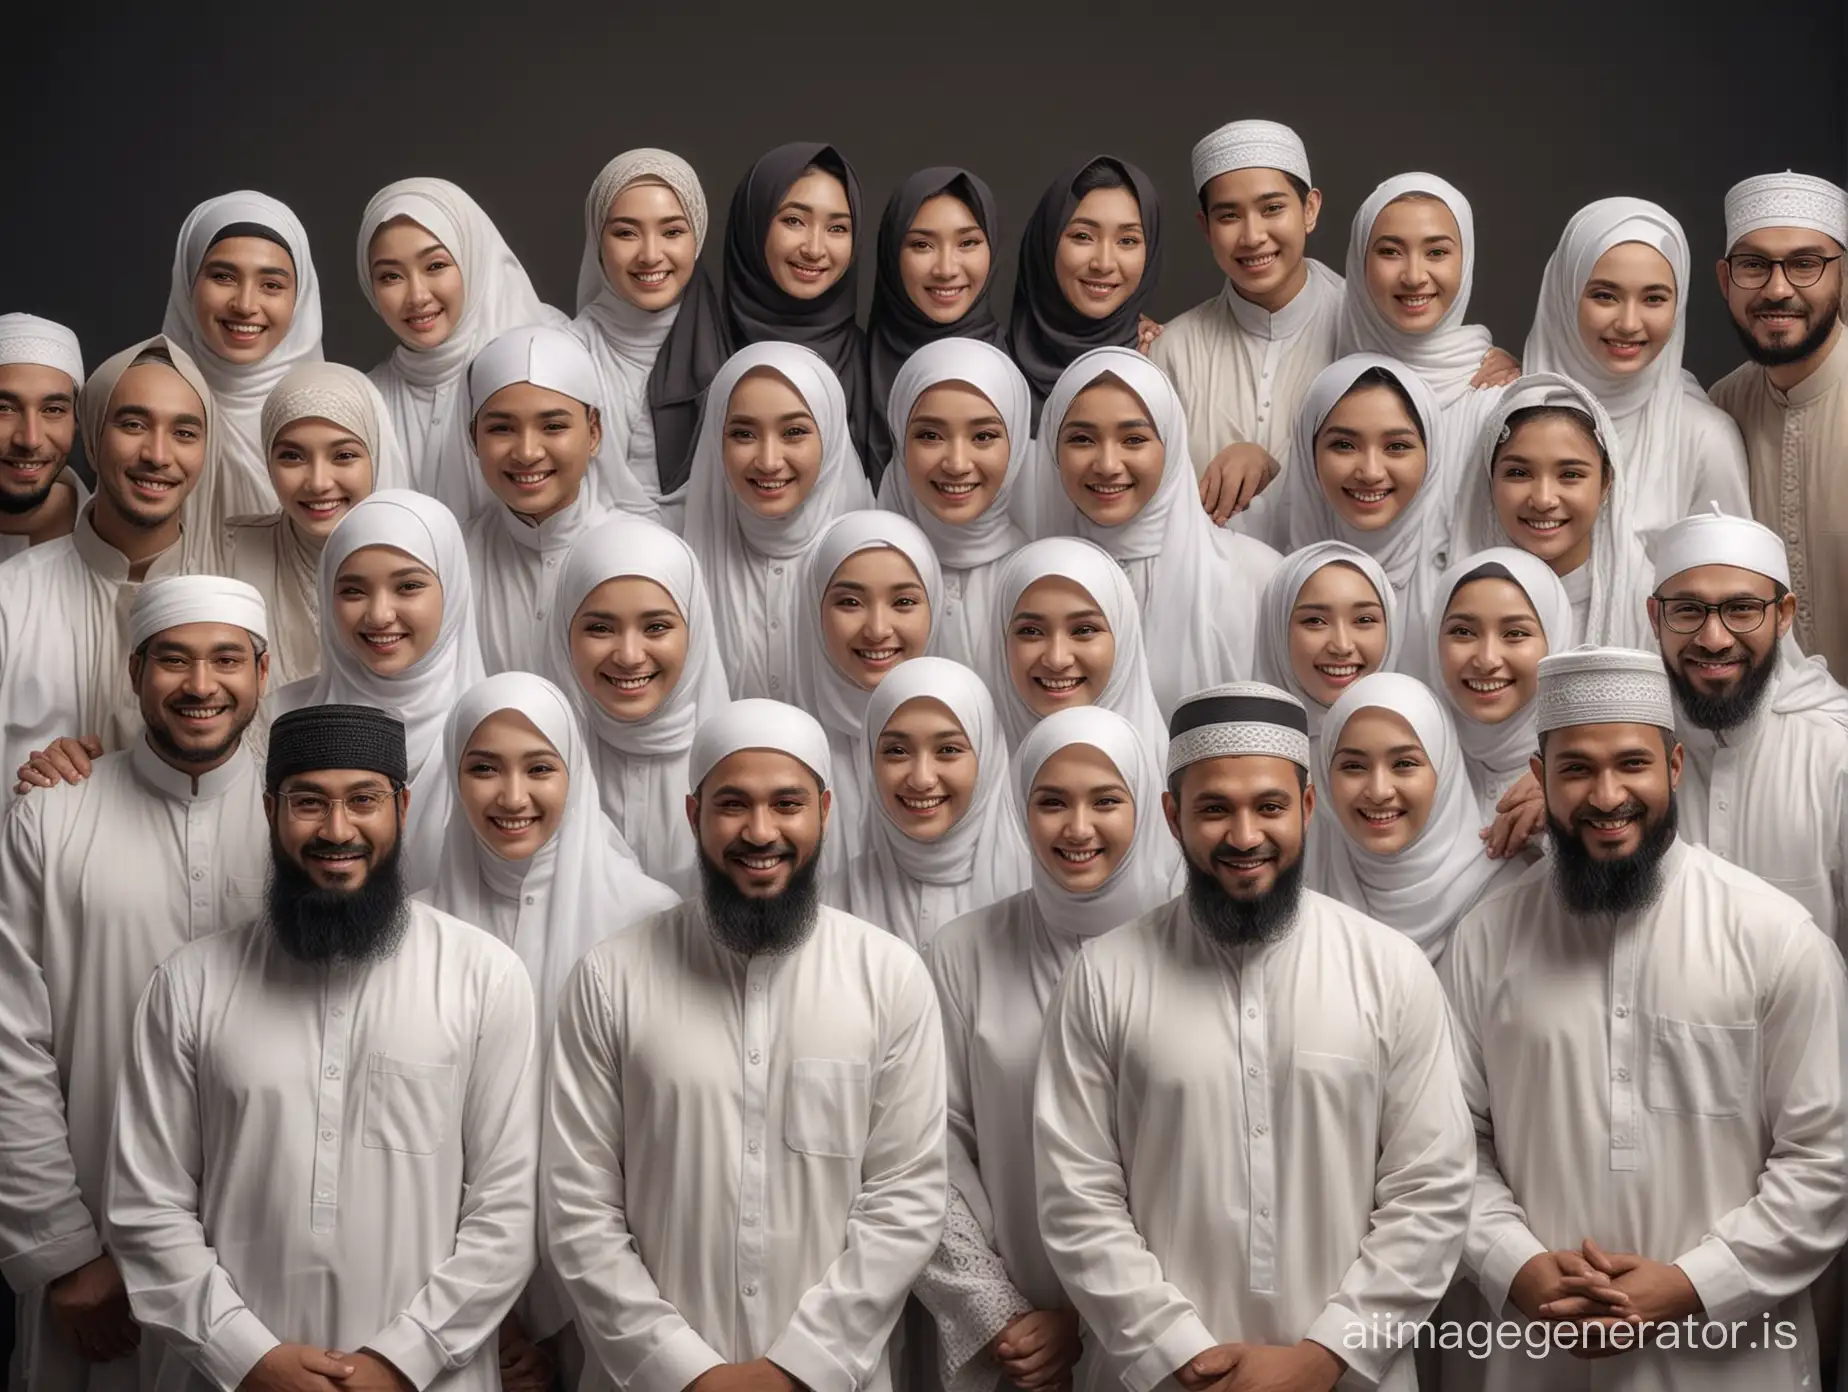 Create realistic photography. Humans numbered dozens of adults, adult men and women. Everyone is normal and happy together. Dressed in white (Asian Muslims). Dark colored photo studio background.